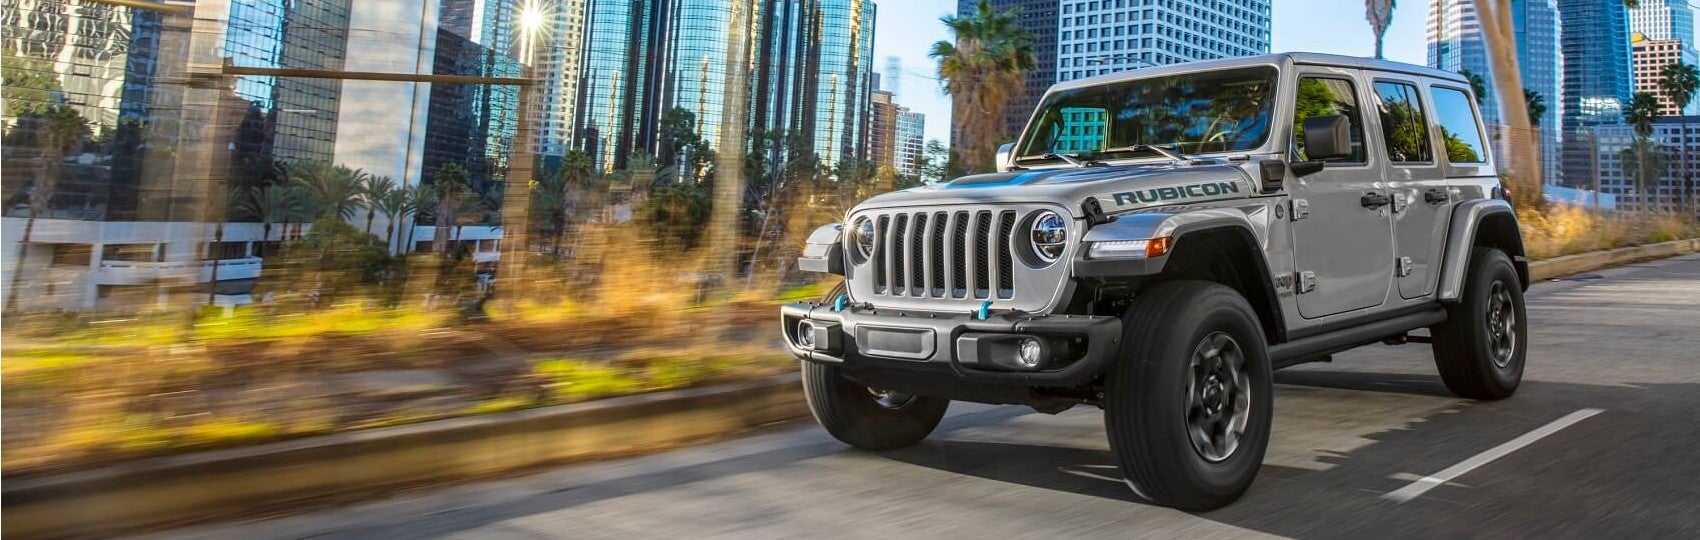 Jeep Wrangler Driving in the City Snipped